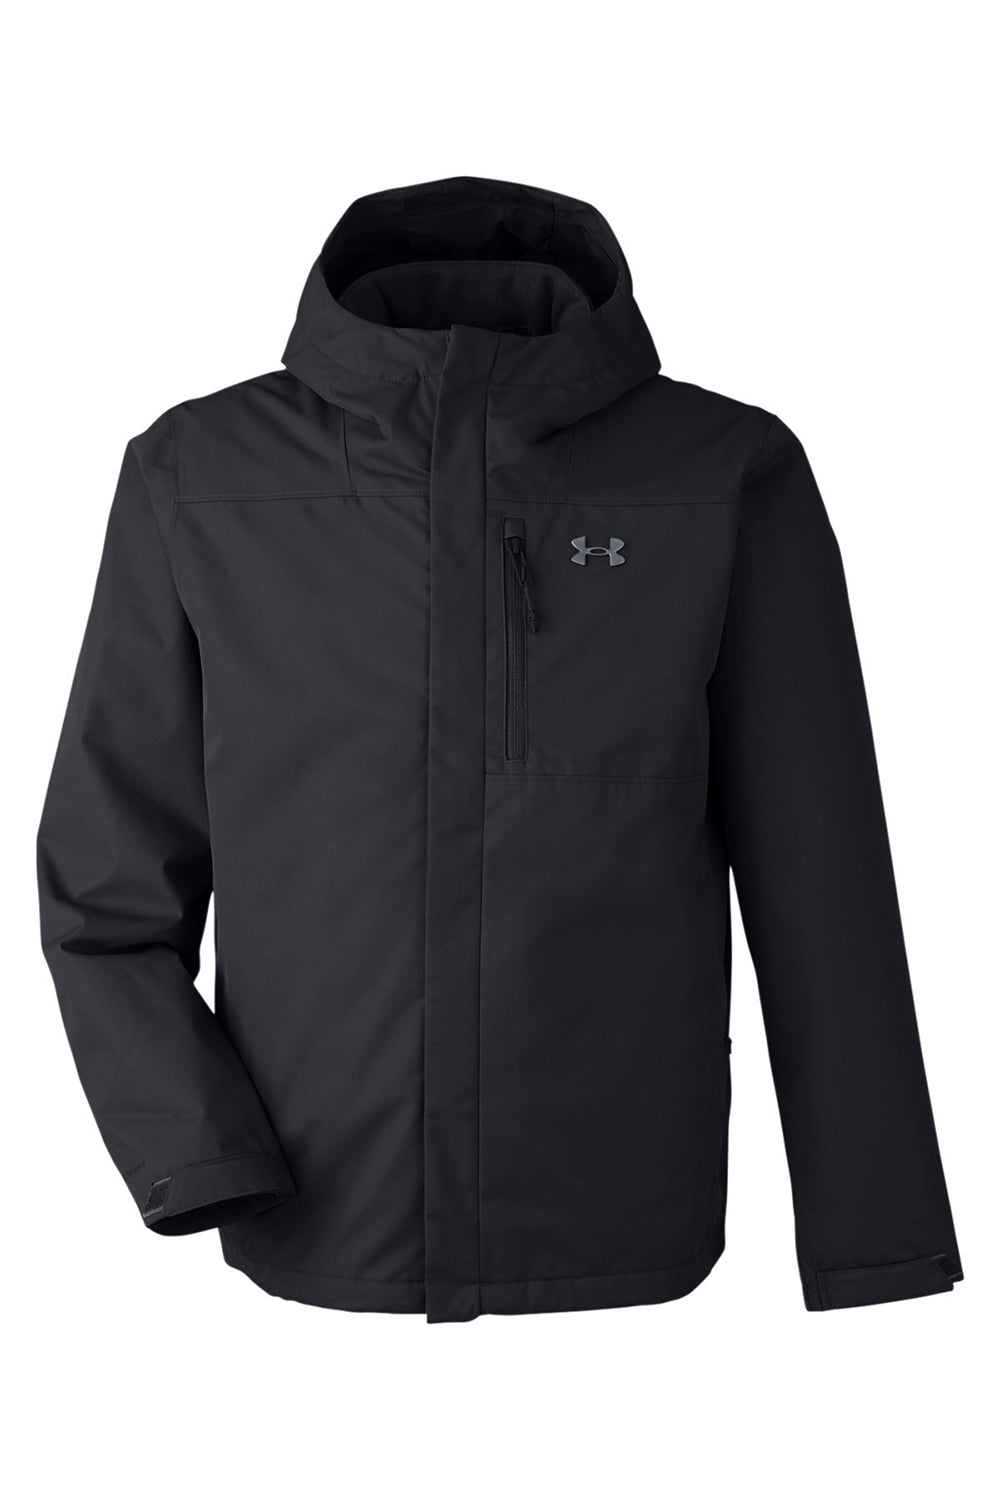 Under Armour 1371585 Mens Porter 2.0 Moisture Wicking 3-In-1 Full Zip Hooded Jacket Black/Pitch Grey Flat Front